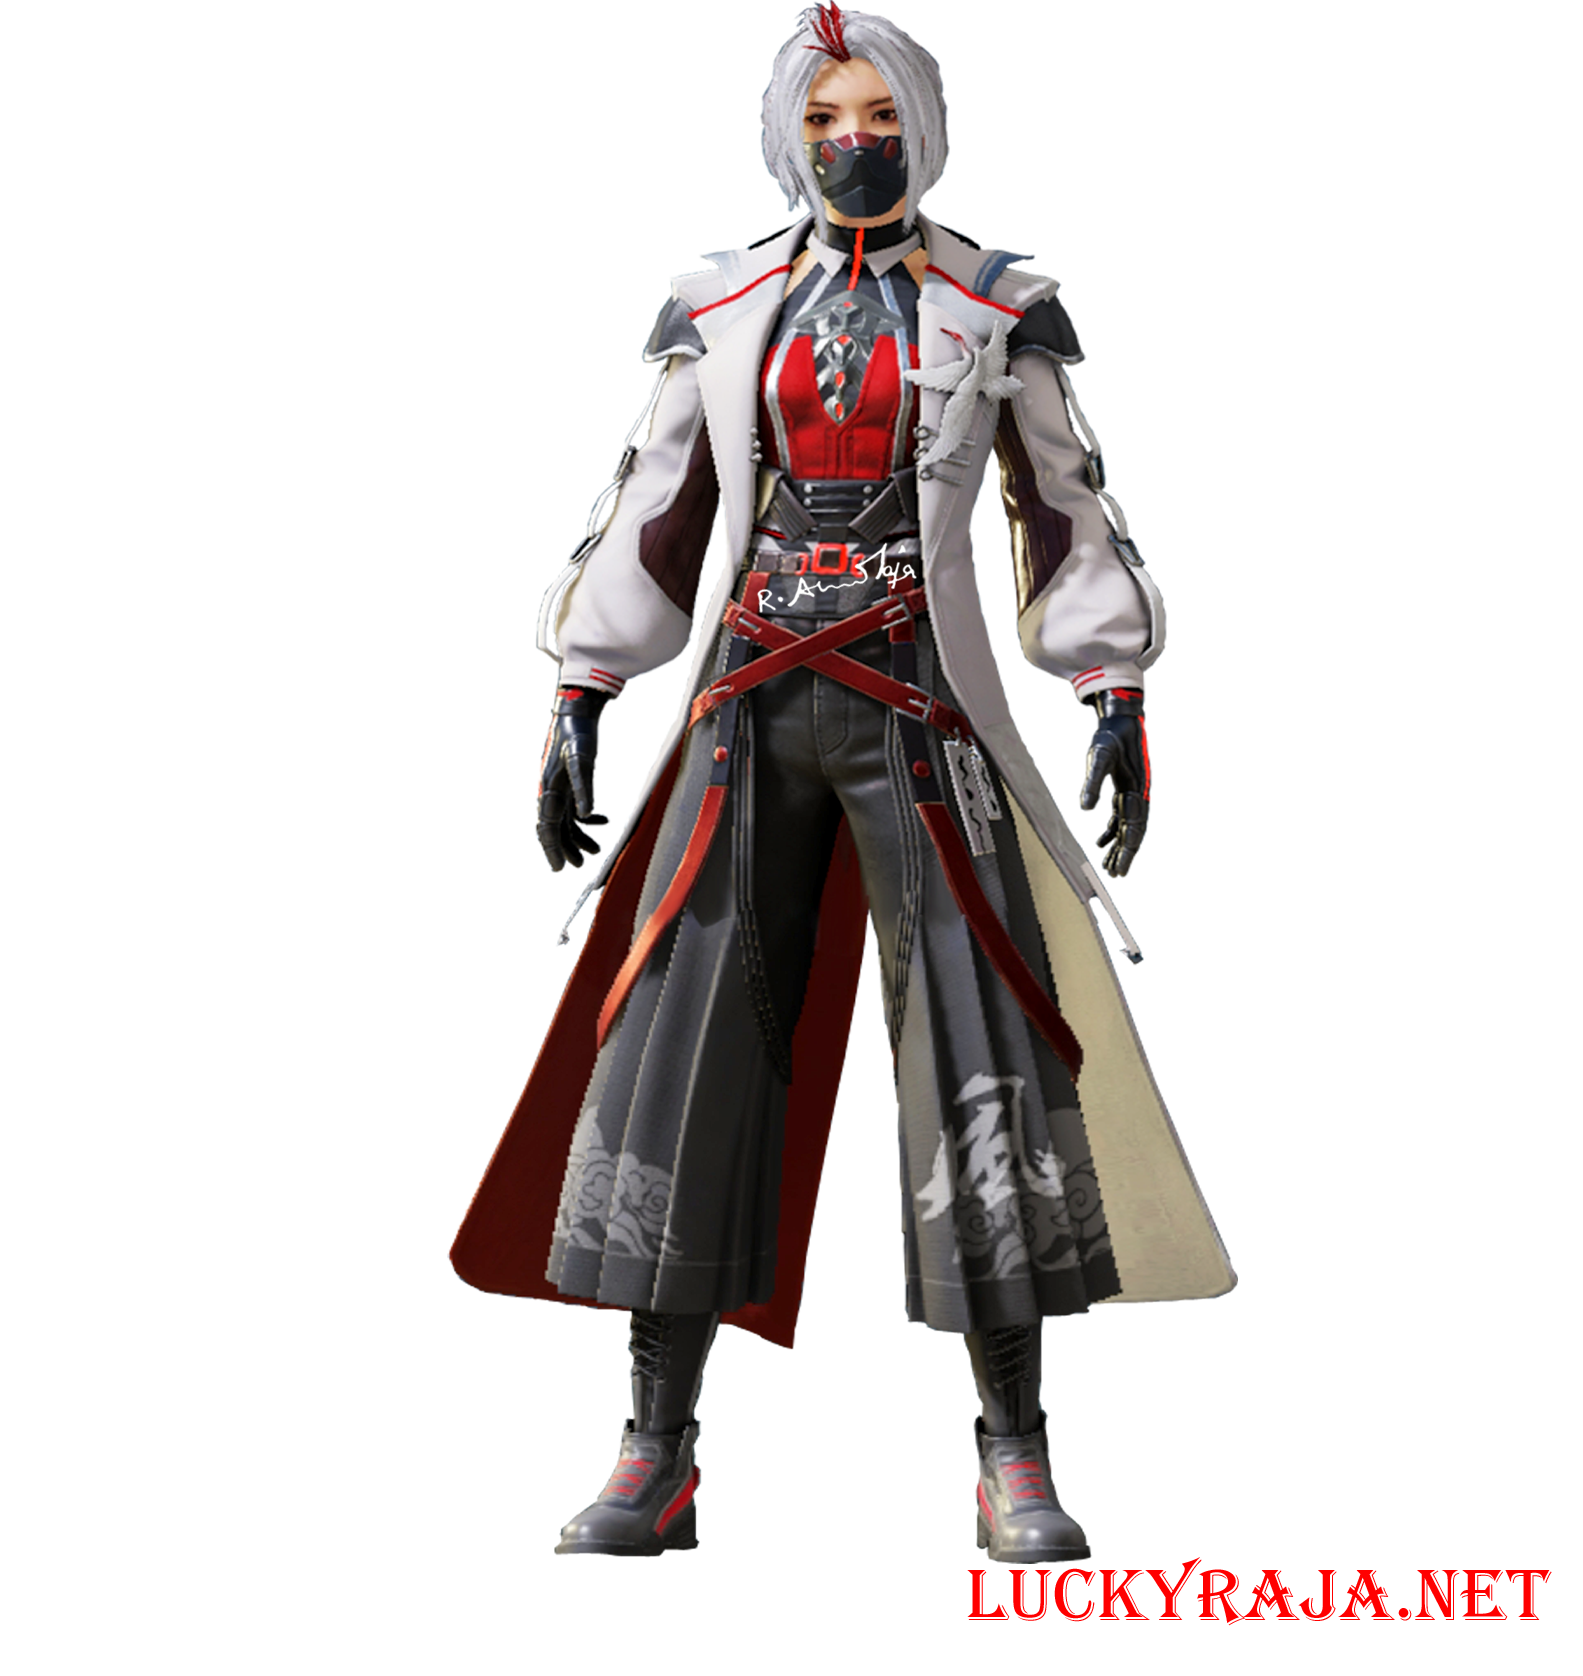 Ascendant Agent,Ascendant Agent outfits,Ascendant Agent images,Ascendant Agent pubg mobile,pubg mobile outfits,animation,cartoon images